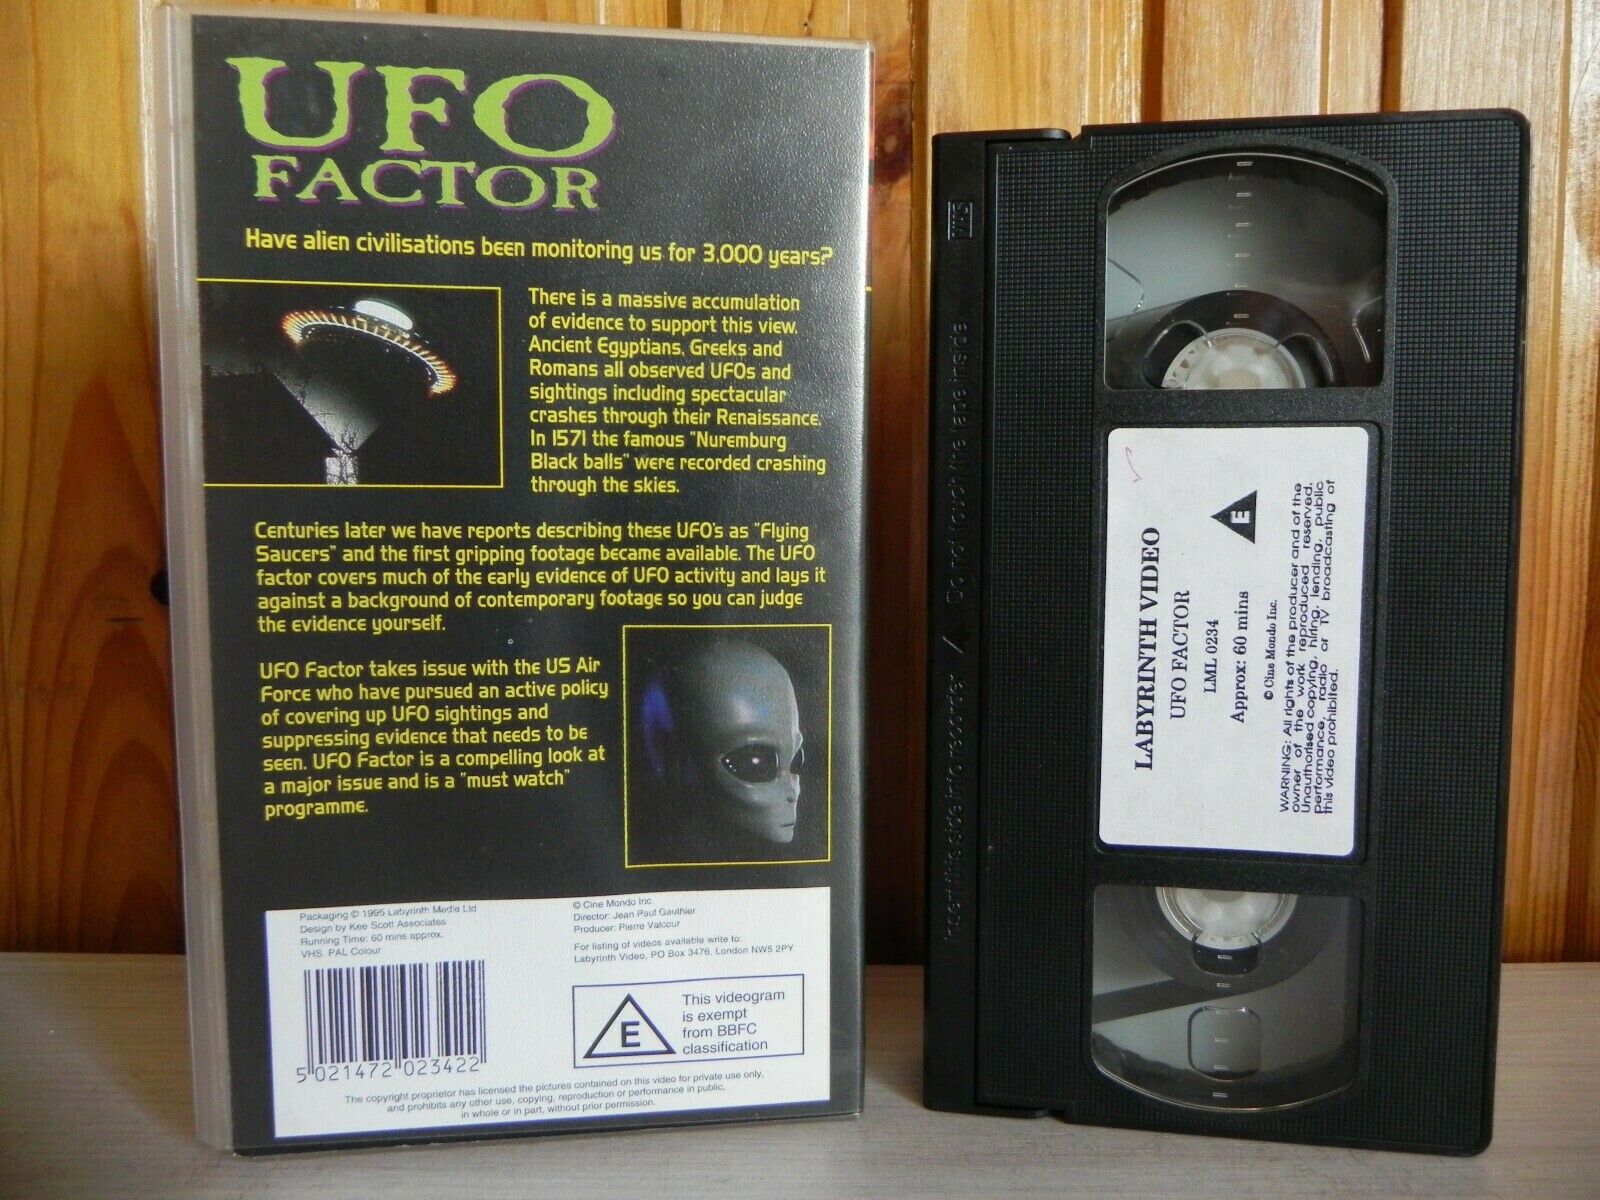 UFO Factor - Aliens 3000+ YEARS - Pierre Valcour - Labyrinth Media - Pal VHS-